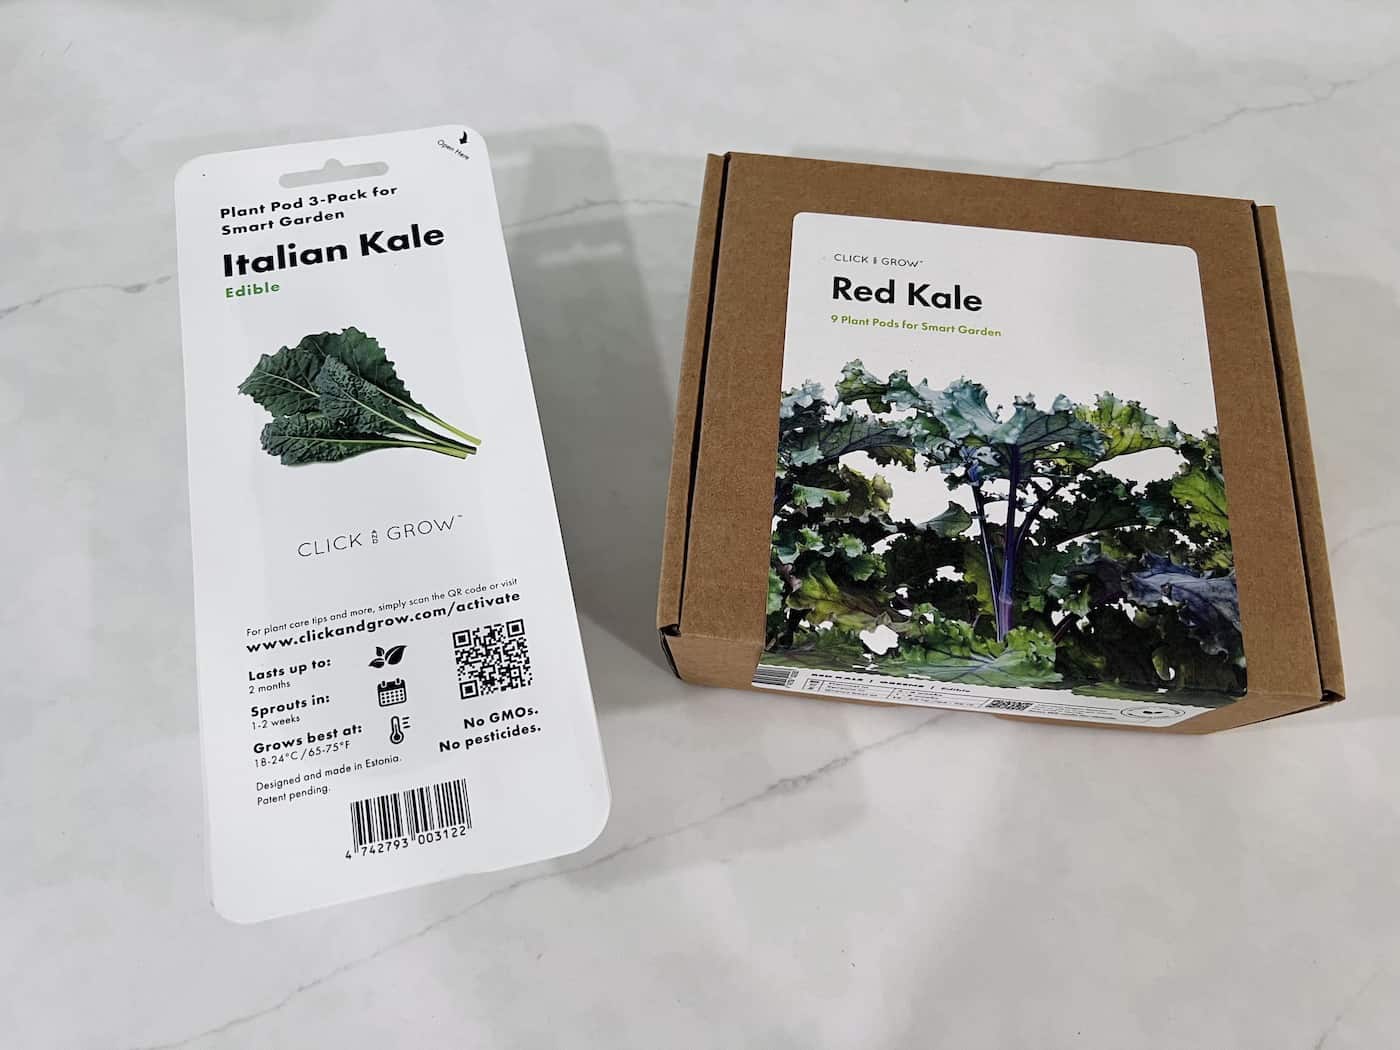 Kale packets for click and grow - italian and red kale